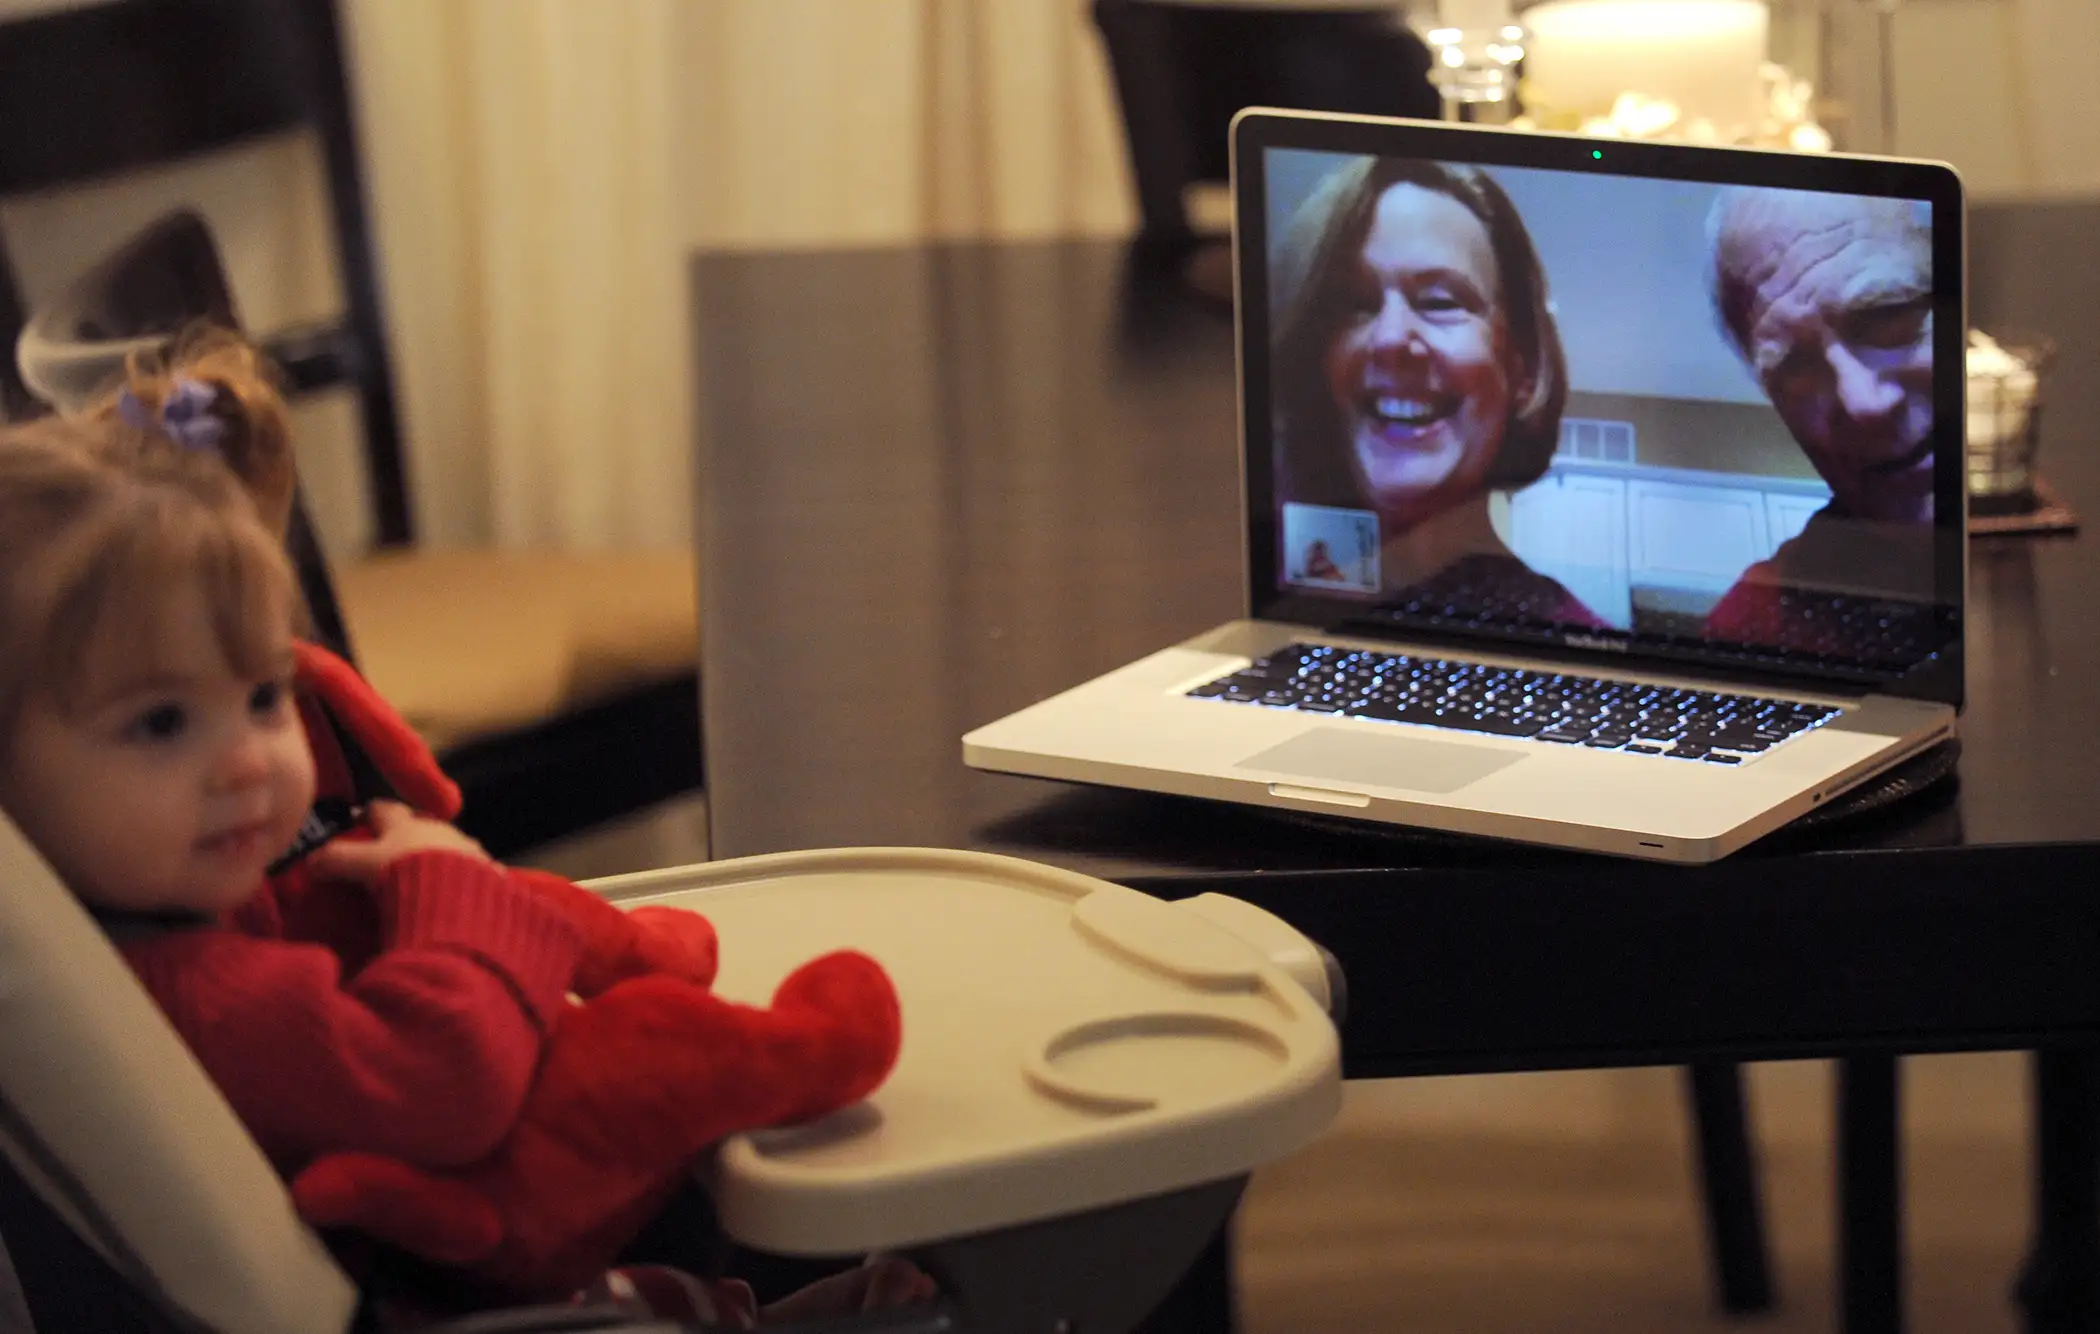 Thirteen-month old Emma Joyce of Hingham, Massachusetts use Skype to visit her grandparents, Don and Jane McClain who live in Dayton, Ohio. Emma's parents are Brian and Allison Joyce.